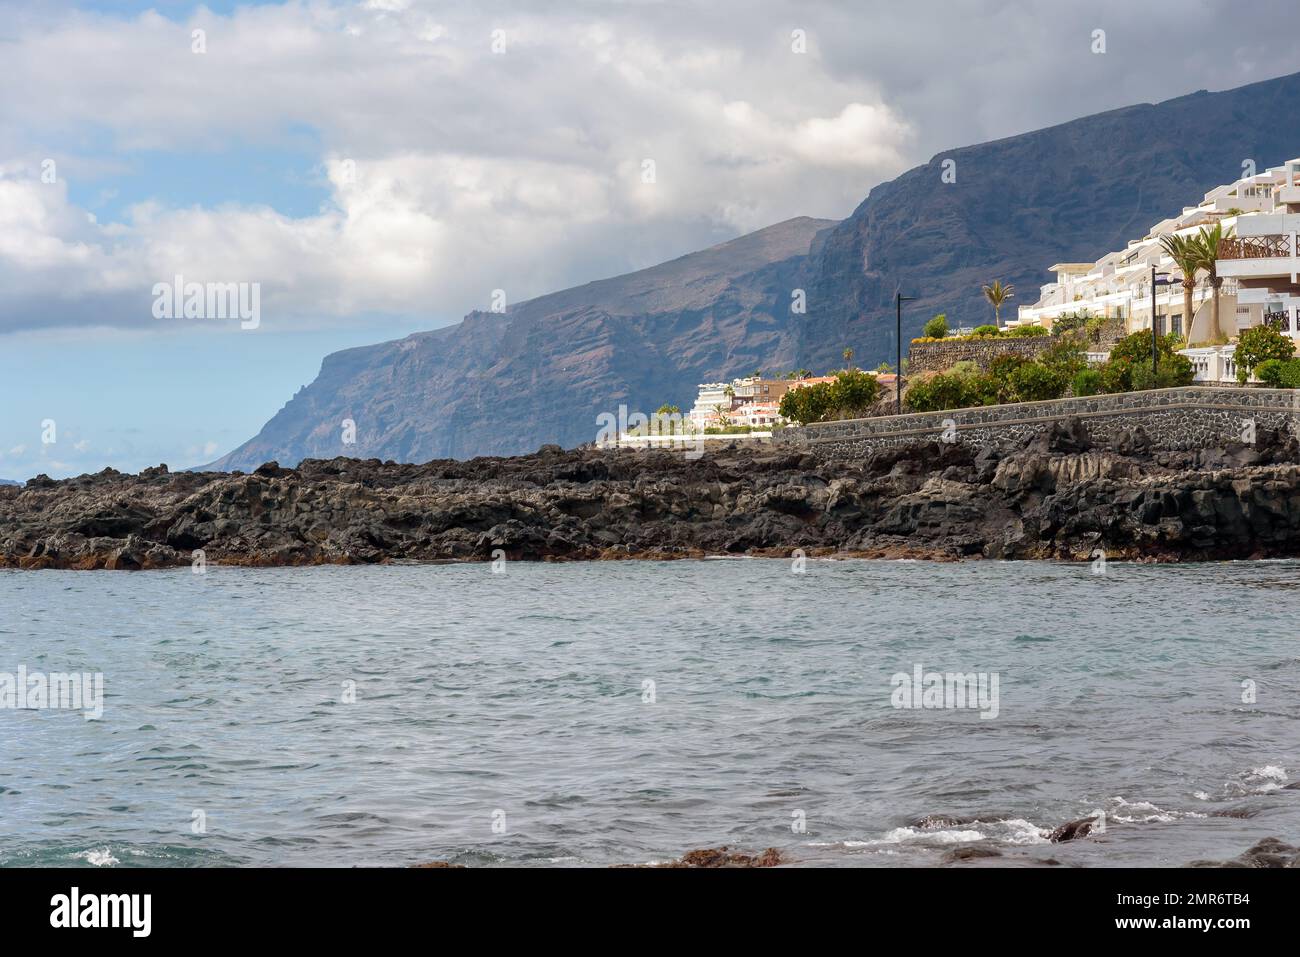 Rocky coast of Tenerife island with famous Los Gigantes cliffs in the background. Canary Islands, Spain Stock Photo